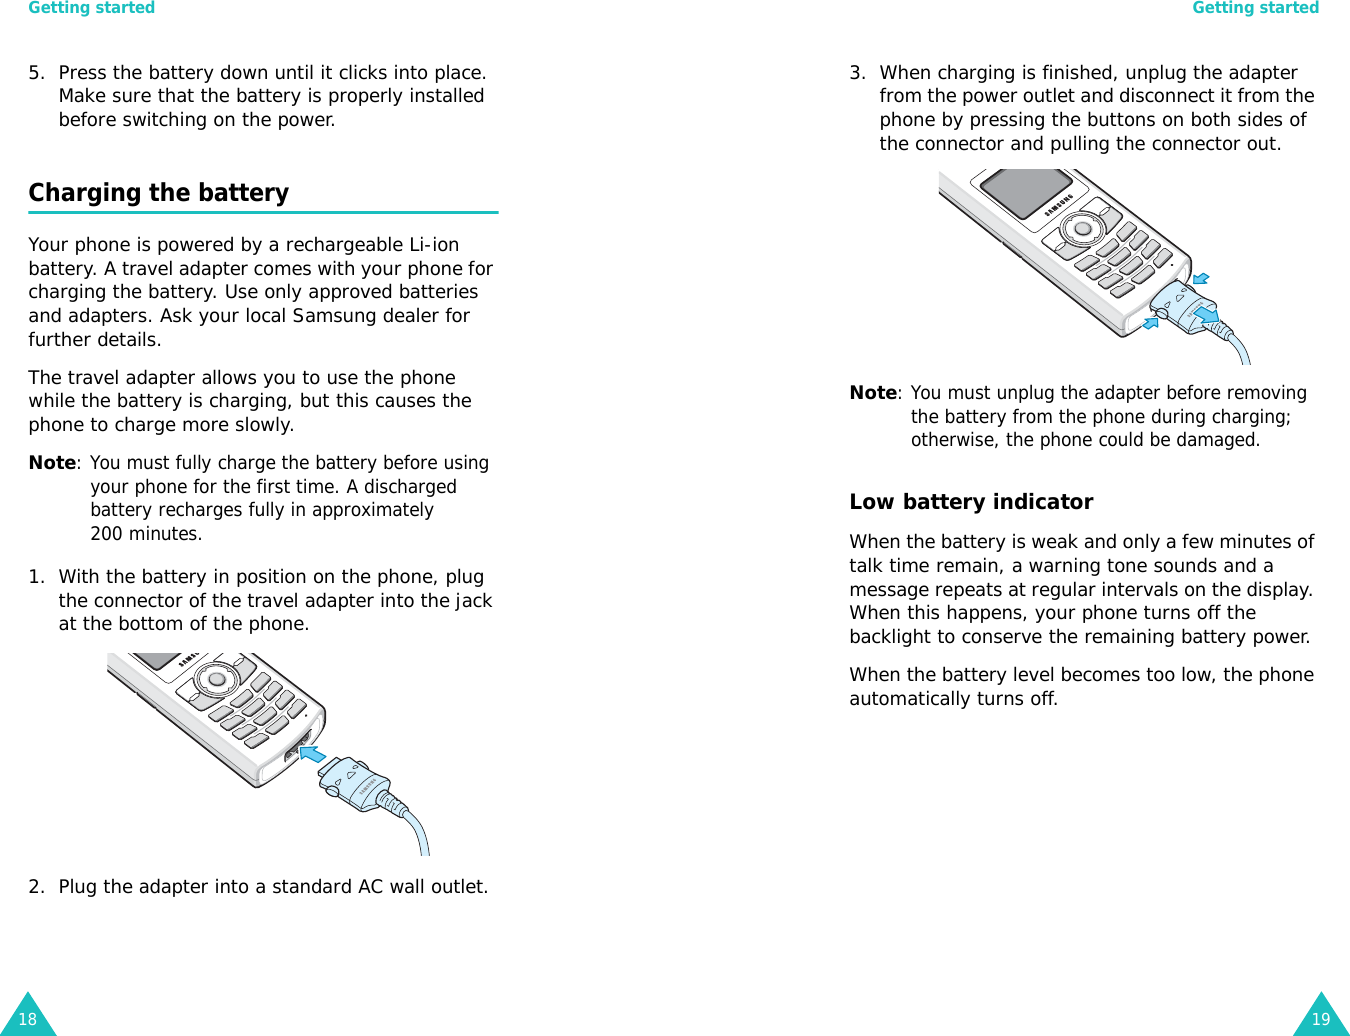 Getting started185. Press the battery down until it clicks into place. Make sure that the battery is properly installed before switching on the power. Charging the batteryYour phone is powered by a rechargeable Li-ion battery. A travel adapter comes with your phone for charging the battery. Use only approved batteries and adapters. Ask your local Samsung dealer for further details.The travel adapter allows you to use the phone while the battery is charging, but this causes the phone to charge more slowly. Note: You must fully charge the battery before using your phone for the first time. A discharged battery recharges fully in approximately 200 minutes.1. With the battery in position on the phone, plug the connector of the travel adapter into the jack at the bottom of the phone. 2. Plug the adapter into a standard AC wall outlet.Getting started193. When charging is finished, unplug the adapter from the power outlet and disconnect it from the phone by pressing the buttons on both sides of the connector and pulling the connector out.Note: You must unplug the adapter before removing the battery from the phone during charging; otherwise, the phone could be damaged.Low battery indicatorWhen the battery is weak and only a few minutes of talk time remain, a warning tone sounds and a message repeats at regular intervals on the display. When this happens, your phone turns off the backlight to conserve the remaining battery power.When the battery level becomes too low, the phone automatically turns off.